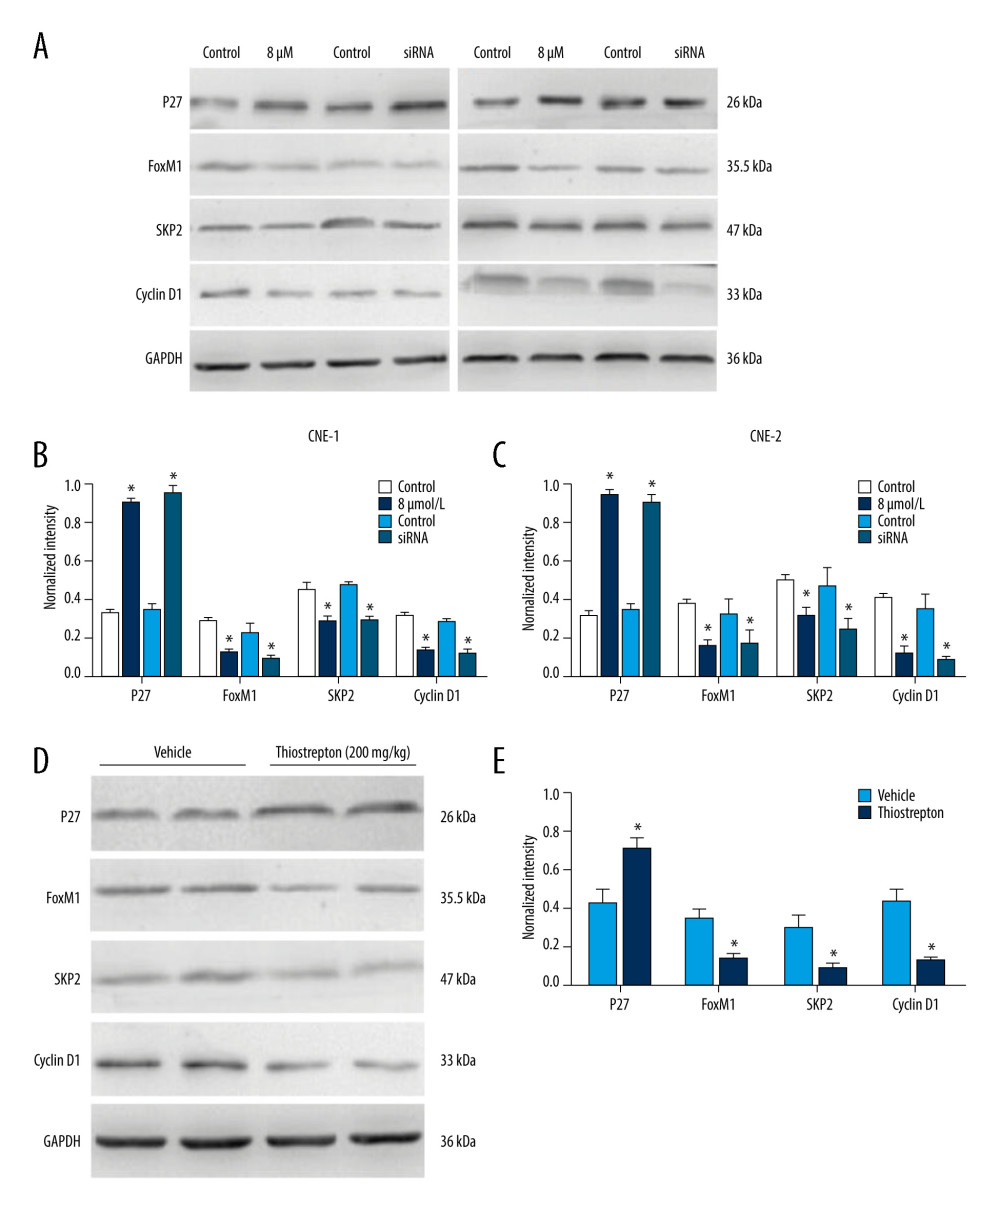 Effect of inhibition of FoxM1 on Wnt/β-catenin signaling activity in NPC cells and NPC xenograft tissues(A) CNE-1 and CNE-2 cells were exposed to vehicle or 8 μM thiostrepton for 72 h, and then the protein expression of Wnt/β-catenin signaling-related proteins was evaluated by western blotting, as indicated. (B) Quantitative data for relative protein expression in CNE-1 cells. (C) Quantitative data for relative protein expression in CNE-2 cells. (D) At 42 days after intraperitoneal injection of vehicle or thiostrepton at a dose of 200 mg/kg body weight, the NPC xenografts were harvested. Tissue lysates were collected, and the protein expression of Wnt/β-catenin signaling-related proteins was evaluated by western blotting, as indicated. Protein expression levels were normalized to the expression level of GAPDH, and the results were then further quantified. (E) Quantitative data for relative protein expression in D. * P<0.05 compared to the control.